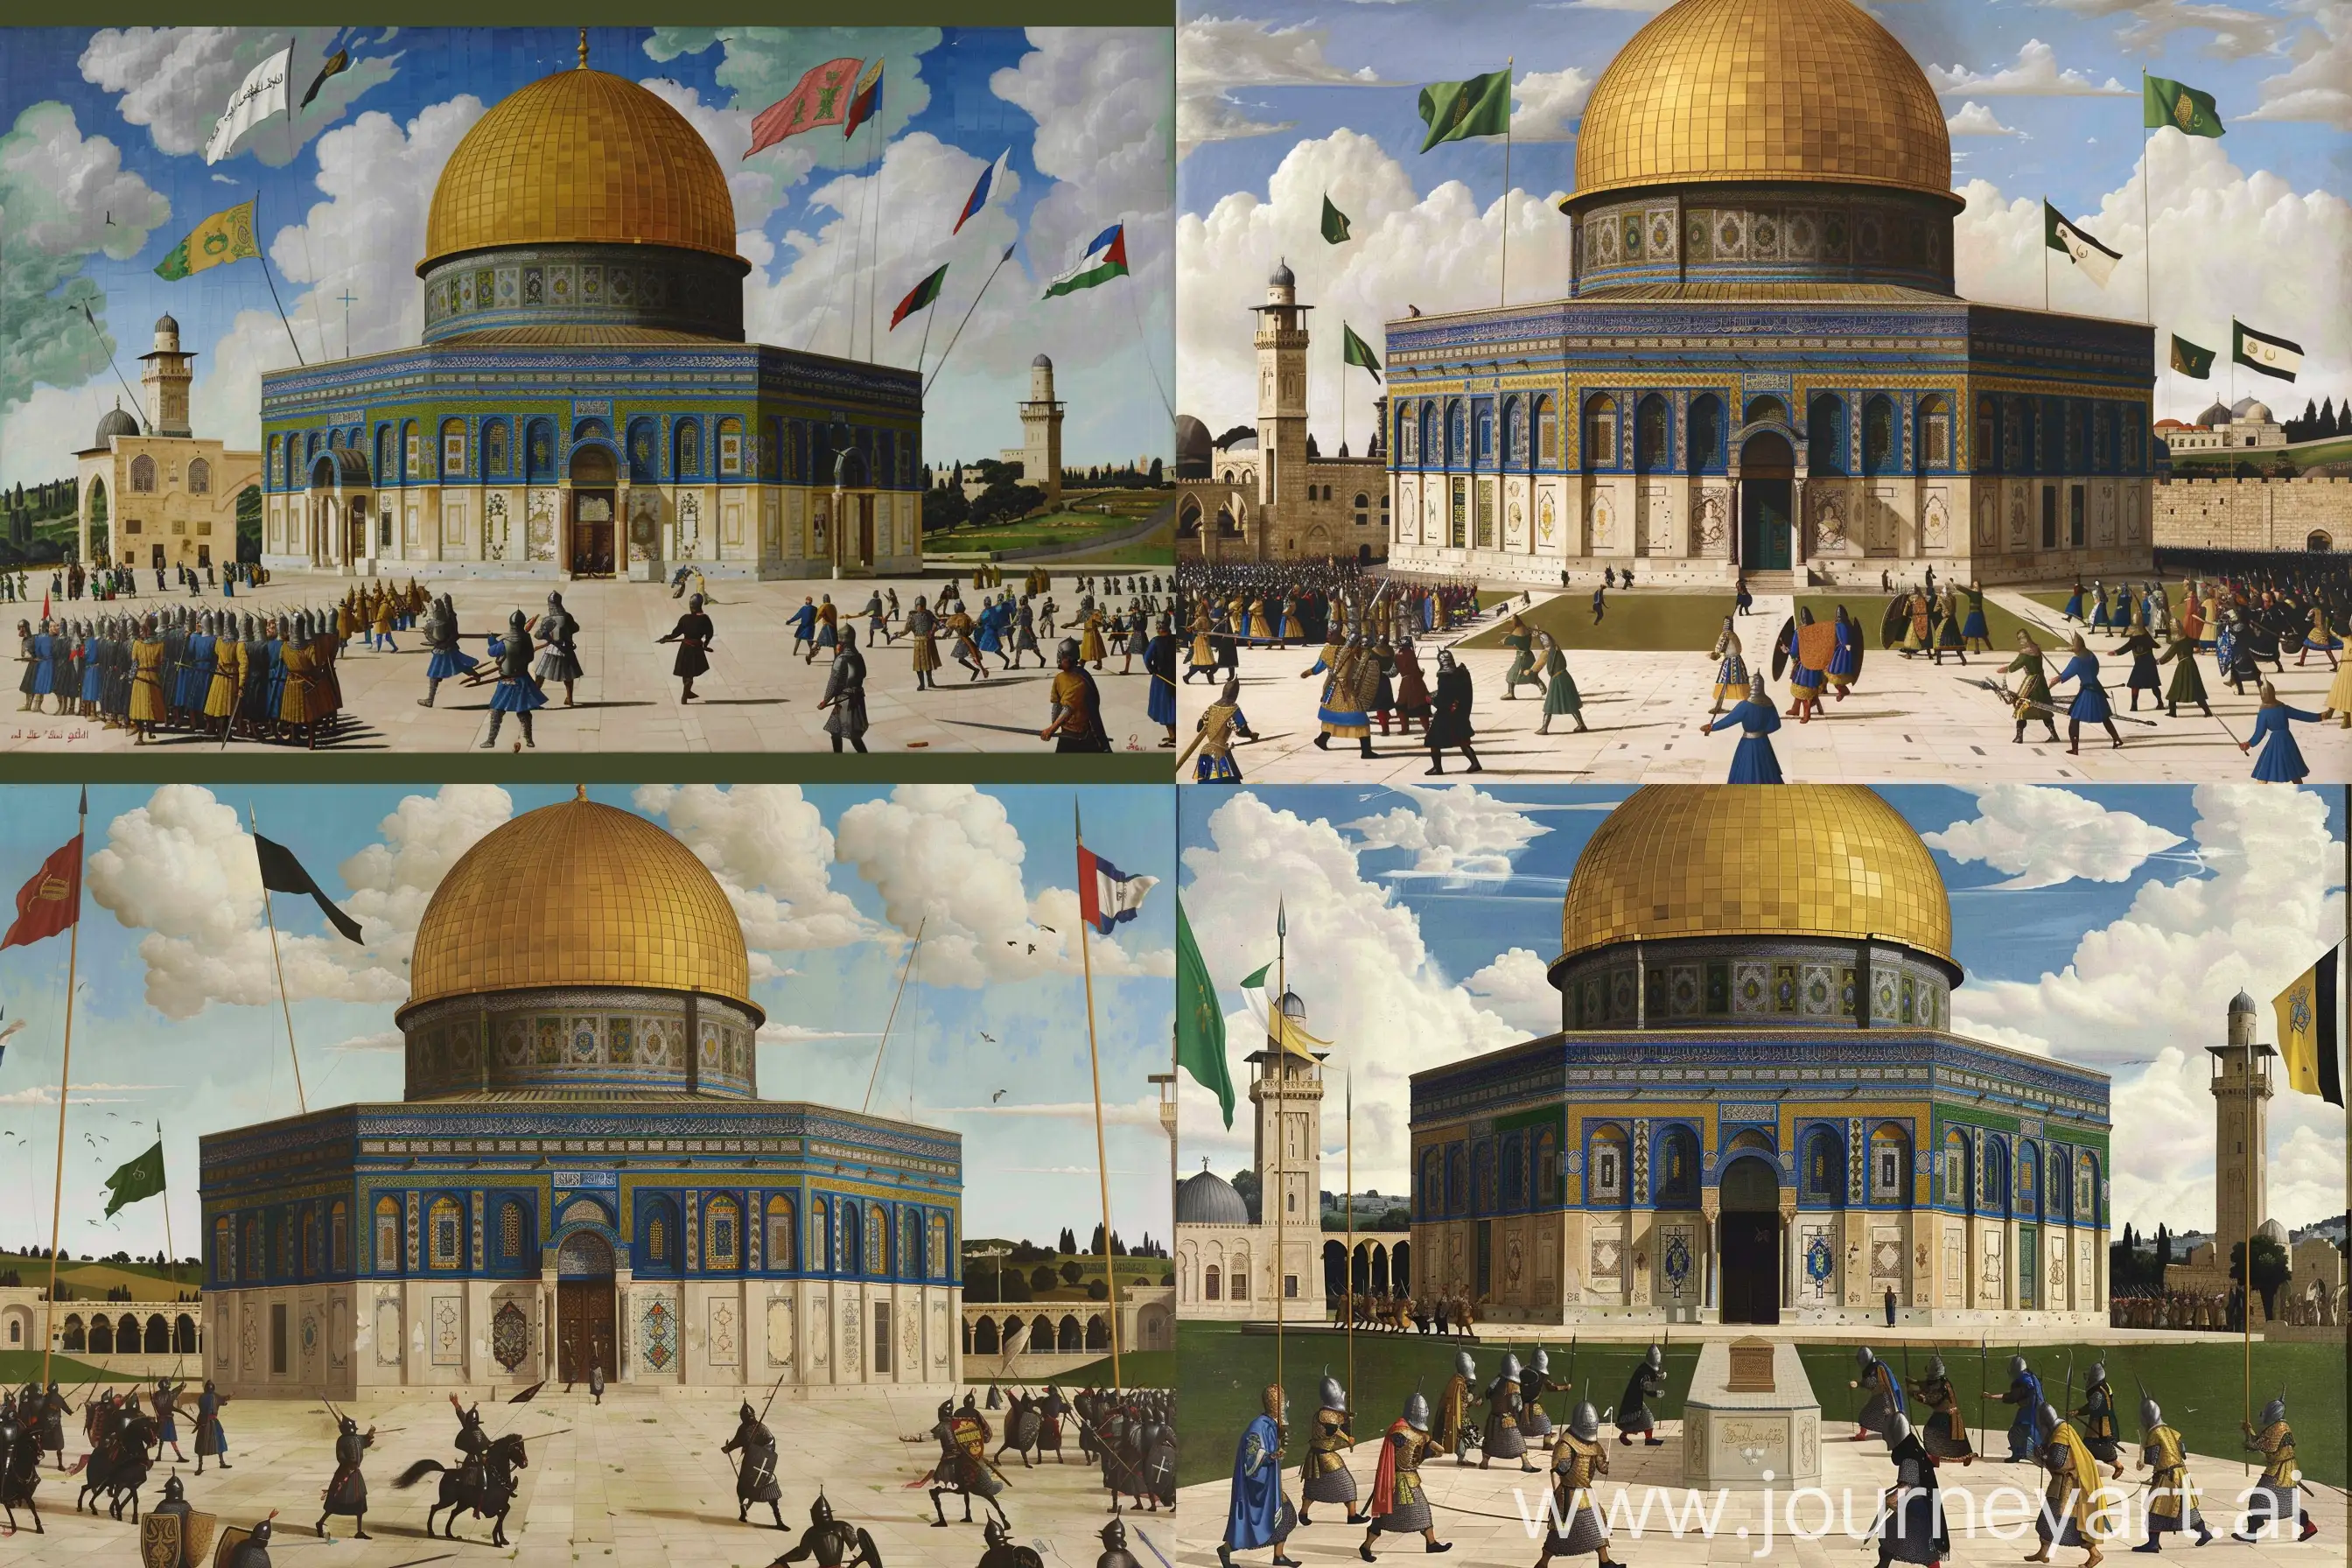 medieval Renaissance painting depicting a medieval battle scene between saracen knights and crusaders, in a lush green field, Al-aqsa mosque of Jerusalem at the center, masjid al-aqsa, cloudy sky, flags and knight banners, heraldic aesthetic --ar 6:4 --v 6 --sref https://cdn.discordapp.com/attachments/1209182749441654865/1247644078070566992/Raffaello_-_Spozalizio_-_Web_Gallery_of_Art.jpg?ex=66616f58&is=66601dd8&hm=476953bed1d1d14ea4d4401426997a6b5832802a906a7439c121236ef68b581e& --cref <https://cdn.discordapp.com/attachments/1213041174428782623/1247881003733614628/images_-_2024-06-05T172308.069.jpg?ex=6661a33f&is=666051bf&hm=d620e36438856c91679b0027c2b15792aacc0cf617e8f43acfe529758e6c60f4&> --cw 99 --sw 999 --q 1